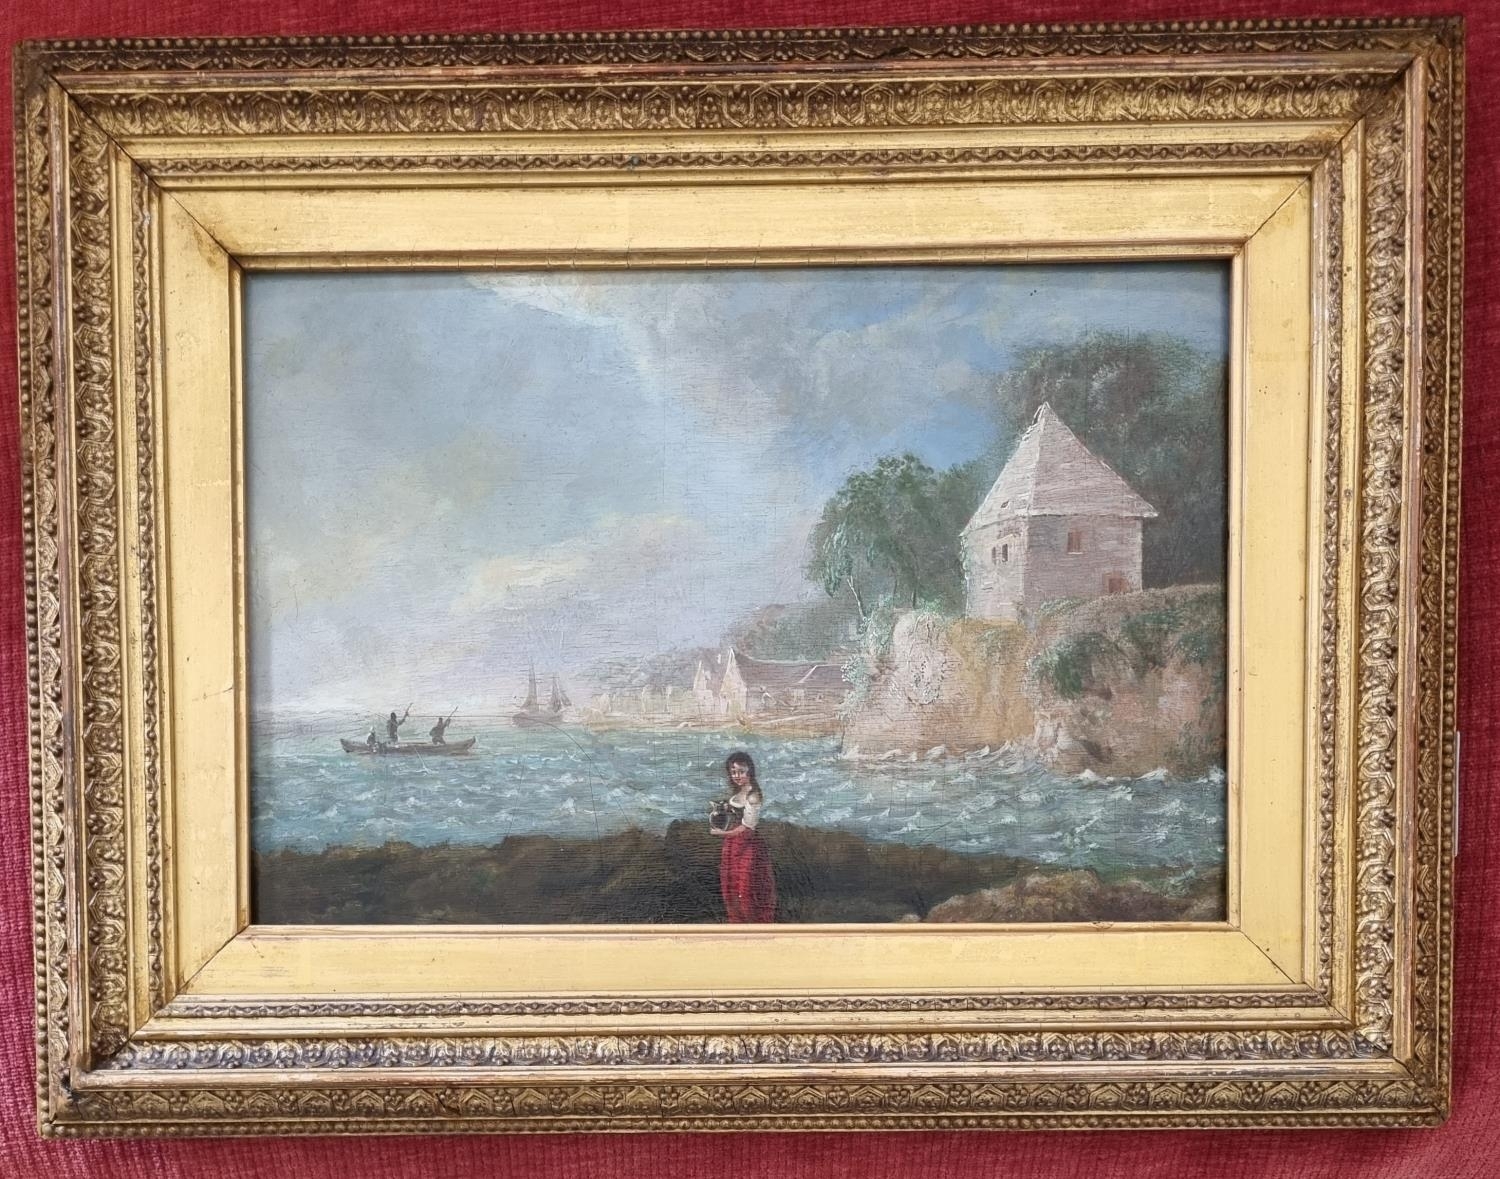 Coastal landscape with a girl holding a ewer in the foreground.
, x cm approx by William Sadler